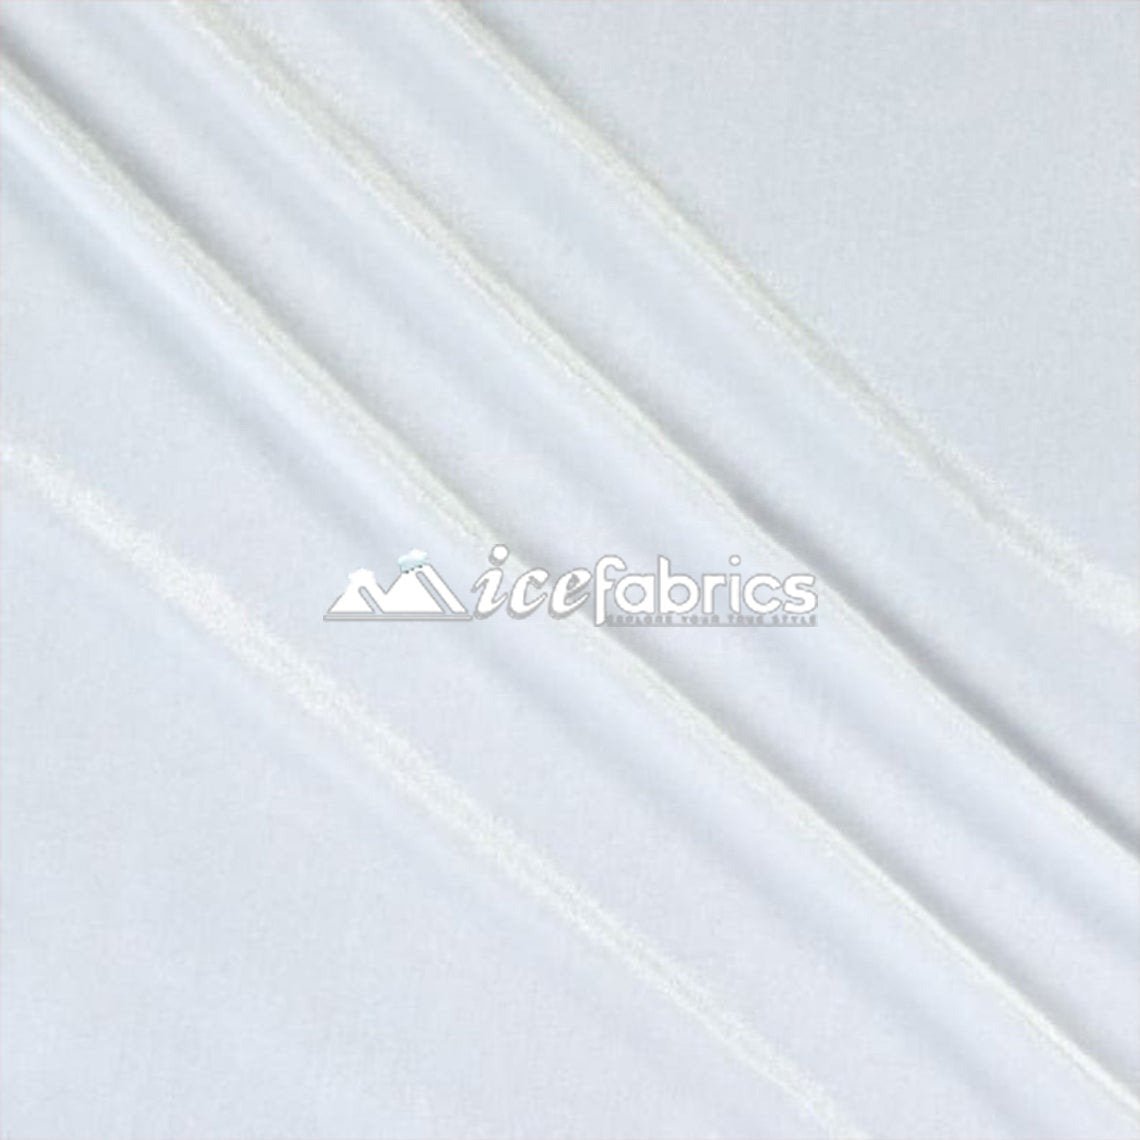 Hight Quality Stretch Velvet Fabric By The Roll (20 yards) Wholesale FabricVelvet FabricICE FABRICSICE FABRICSWhiteBy The Roll (60" Wide)Hight Quality Stretch Velvet Fabric By The Roll (20 yards) Wholesale Fabric ICE FABRICS White